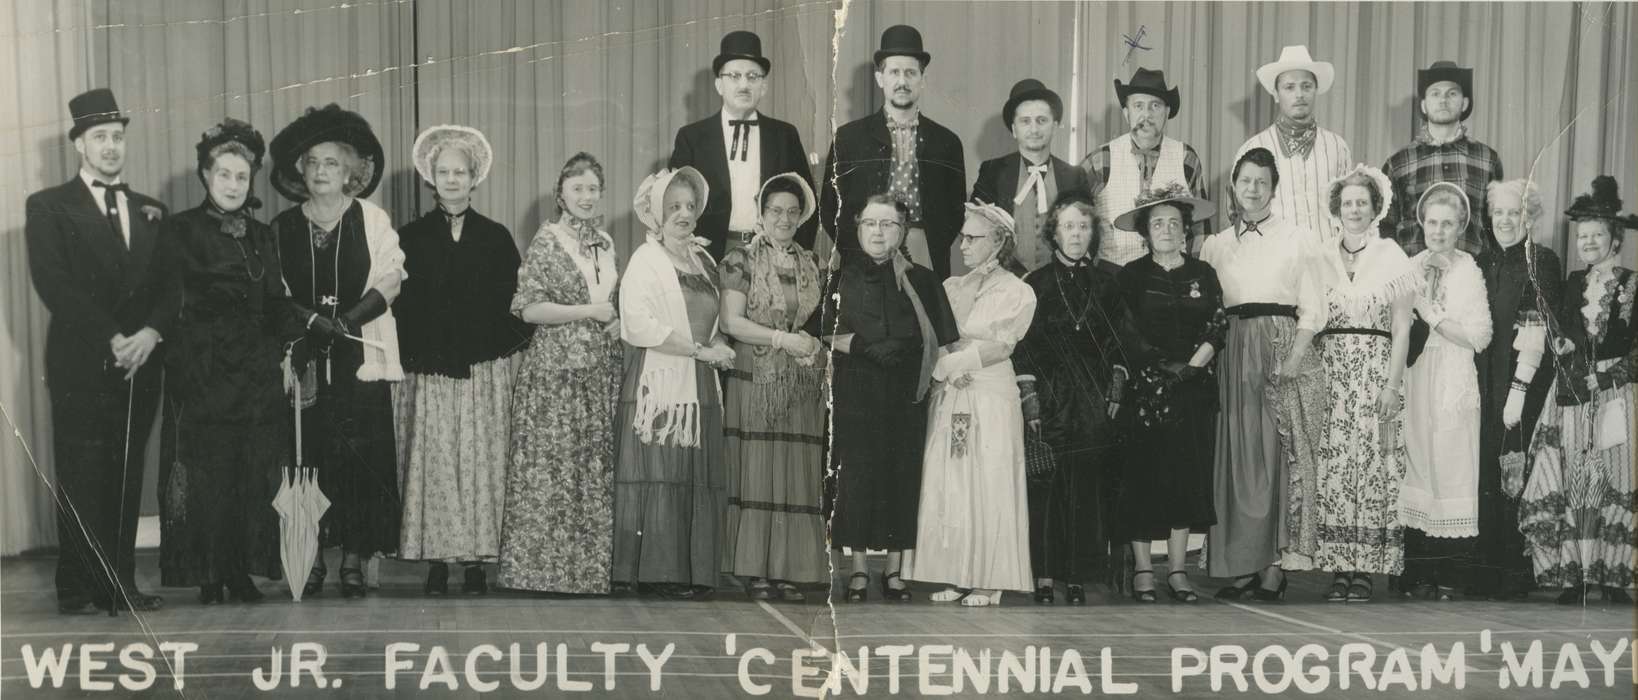 Entertainment, Schools and Education, cowboy hat, Iowa History, stage, Portraits - Group, performance, Rossiter, Lynn, Sioux City, IA, Iowa, history of Iowa, umbrella, play